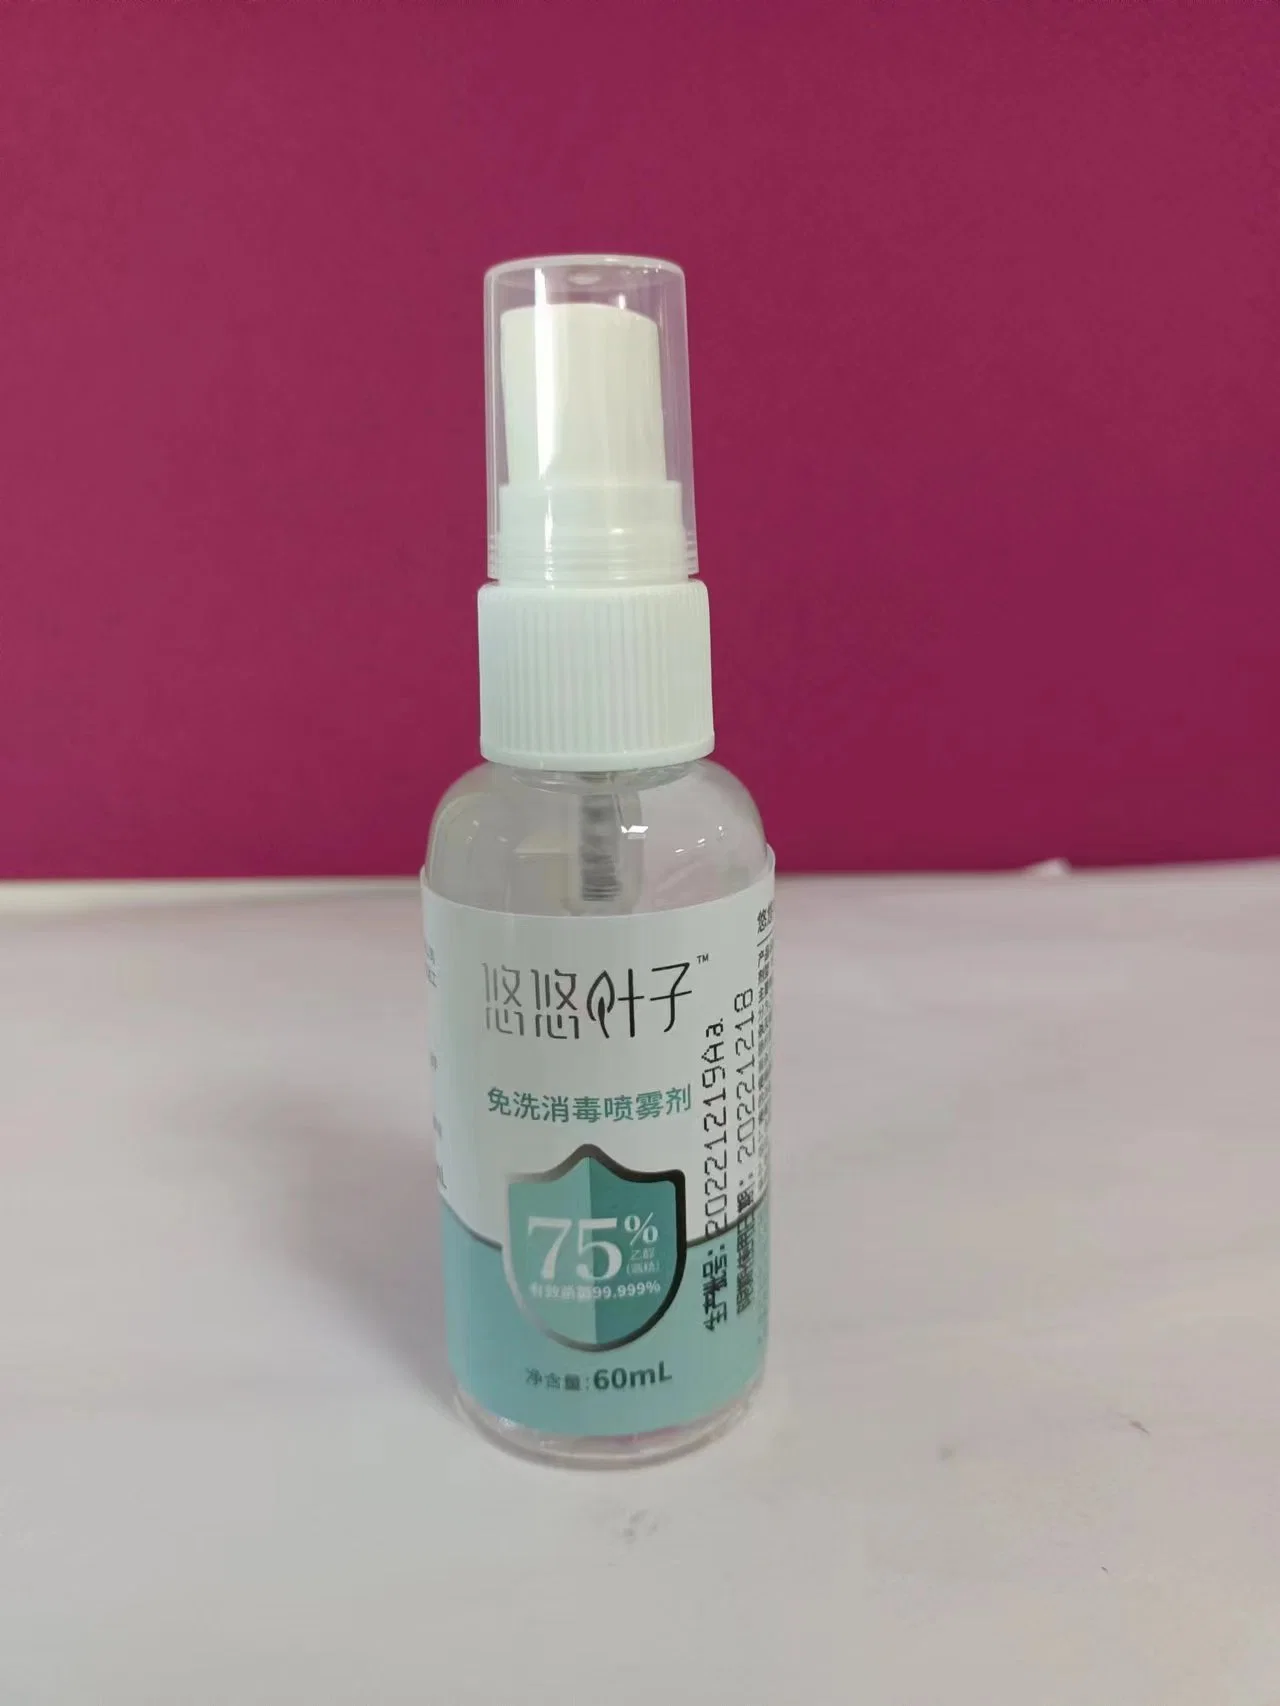 200ml Portable Hands-Free Disinfectant Spray 75% Alcohol Wash-Free Hand Disinfectant Spray 99.9% Skin Disinfection